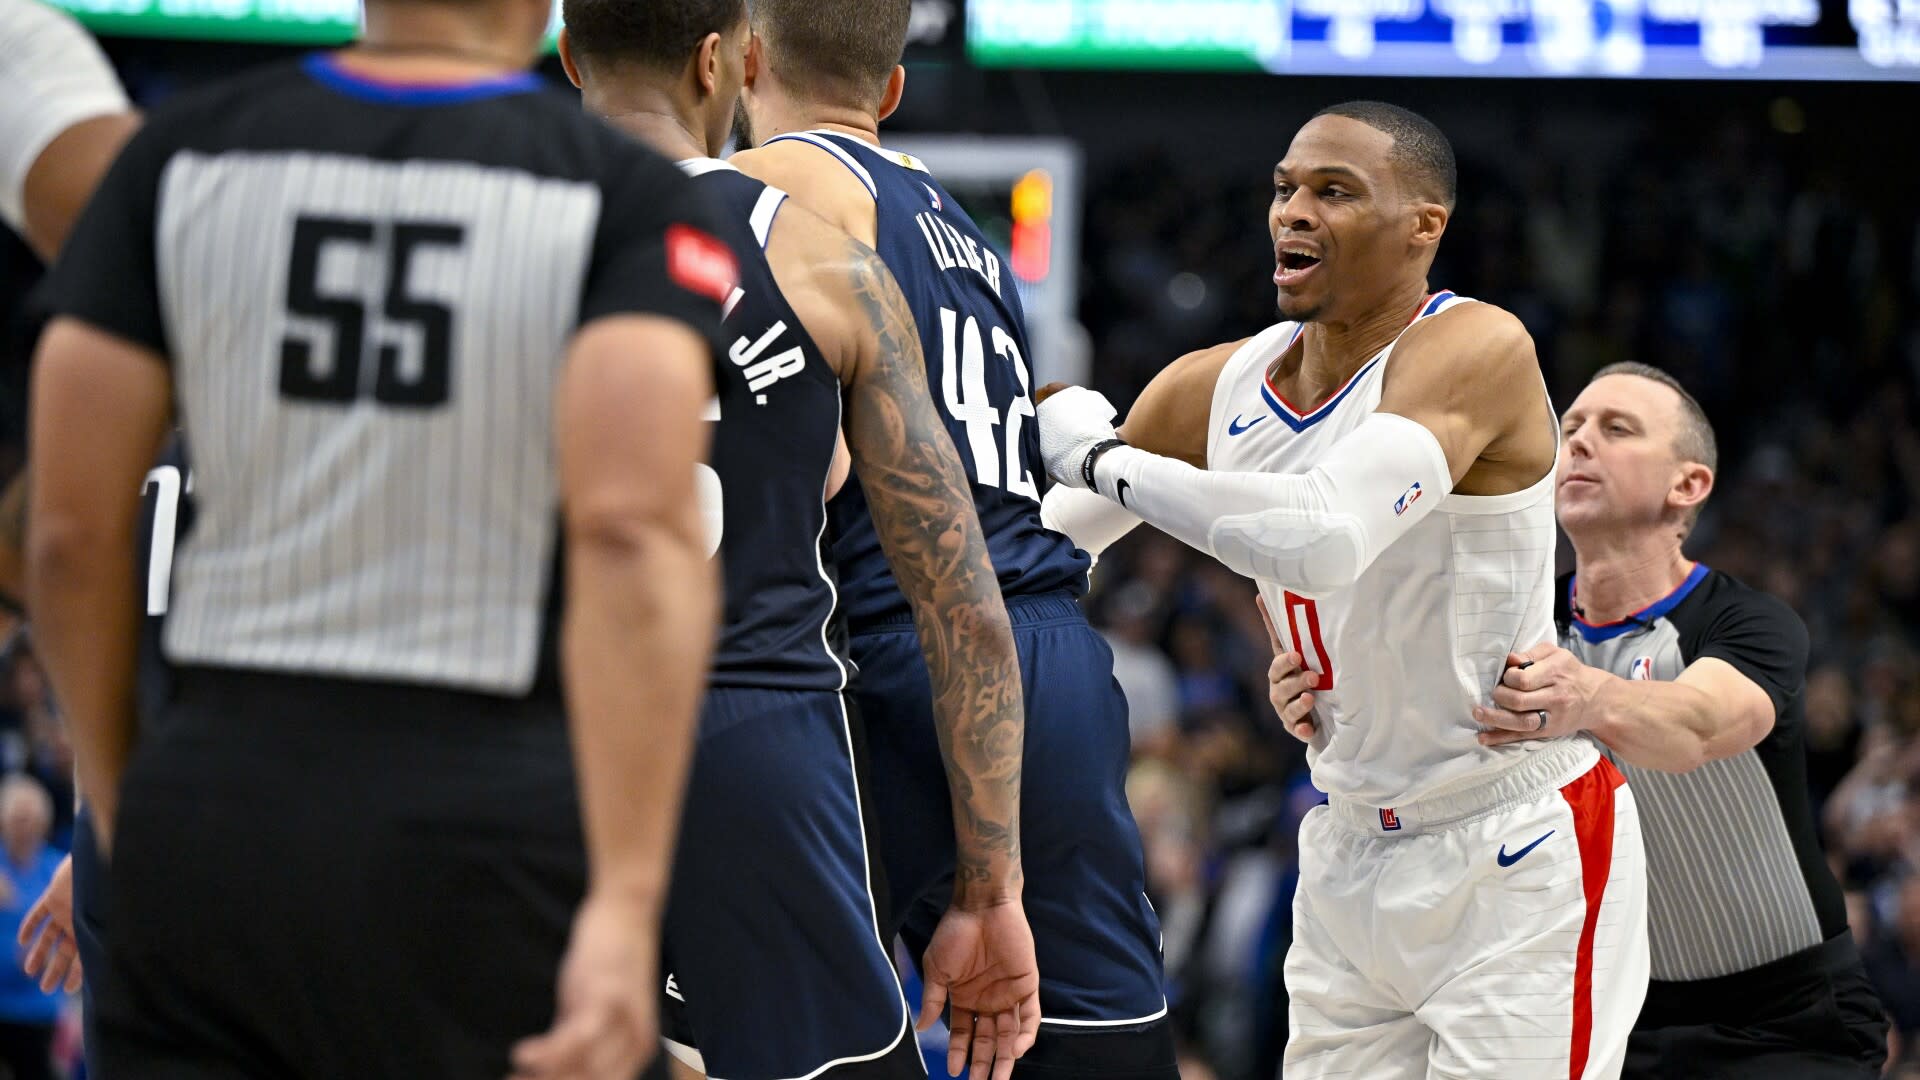 Watch Russell Westbrook get ejected as Clippers fall to Mavericks 101-90